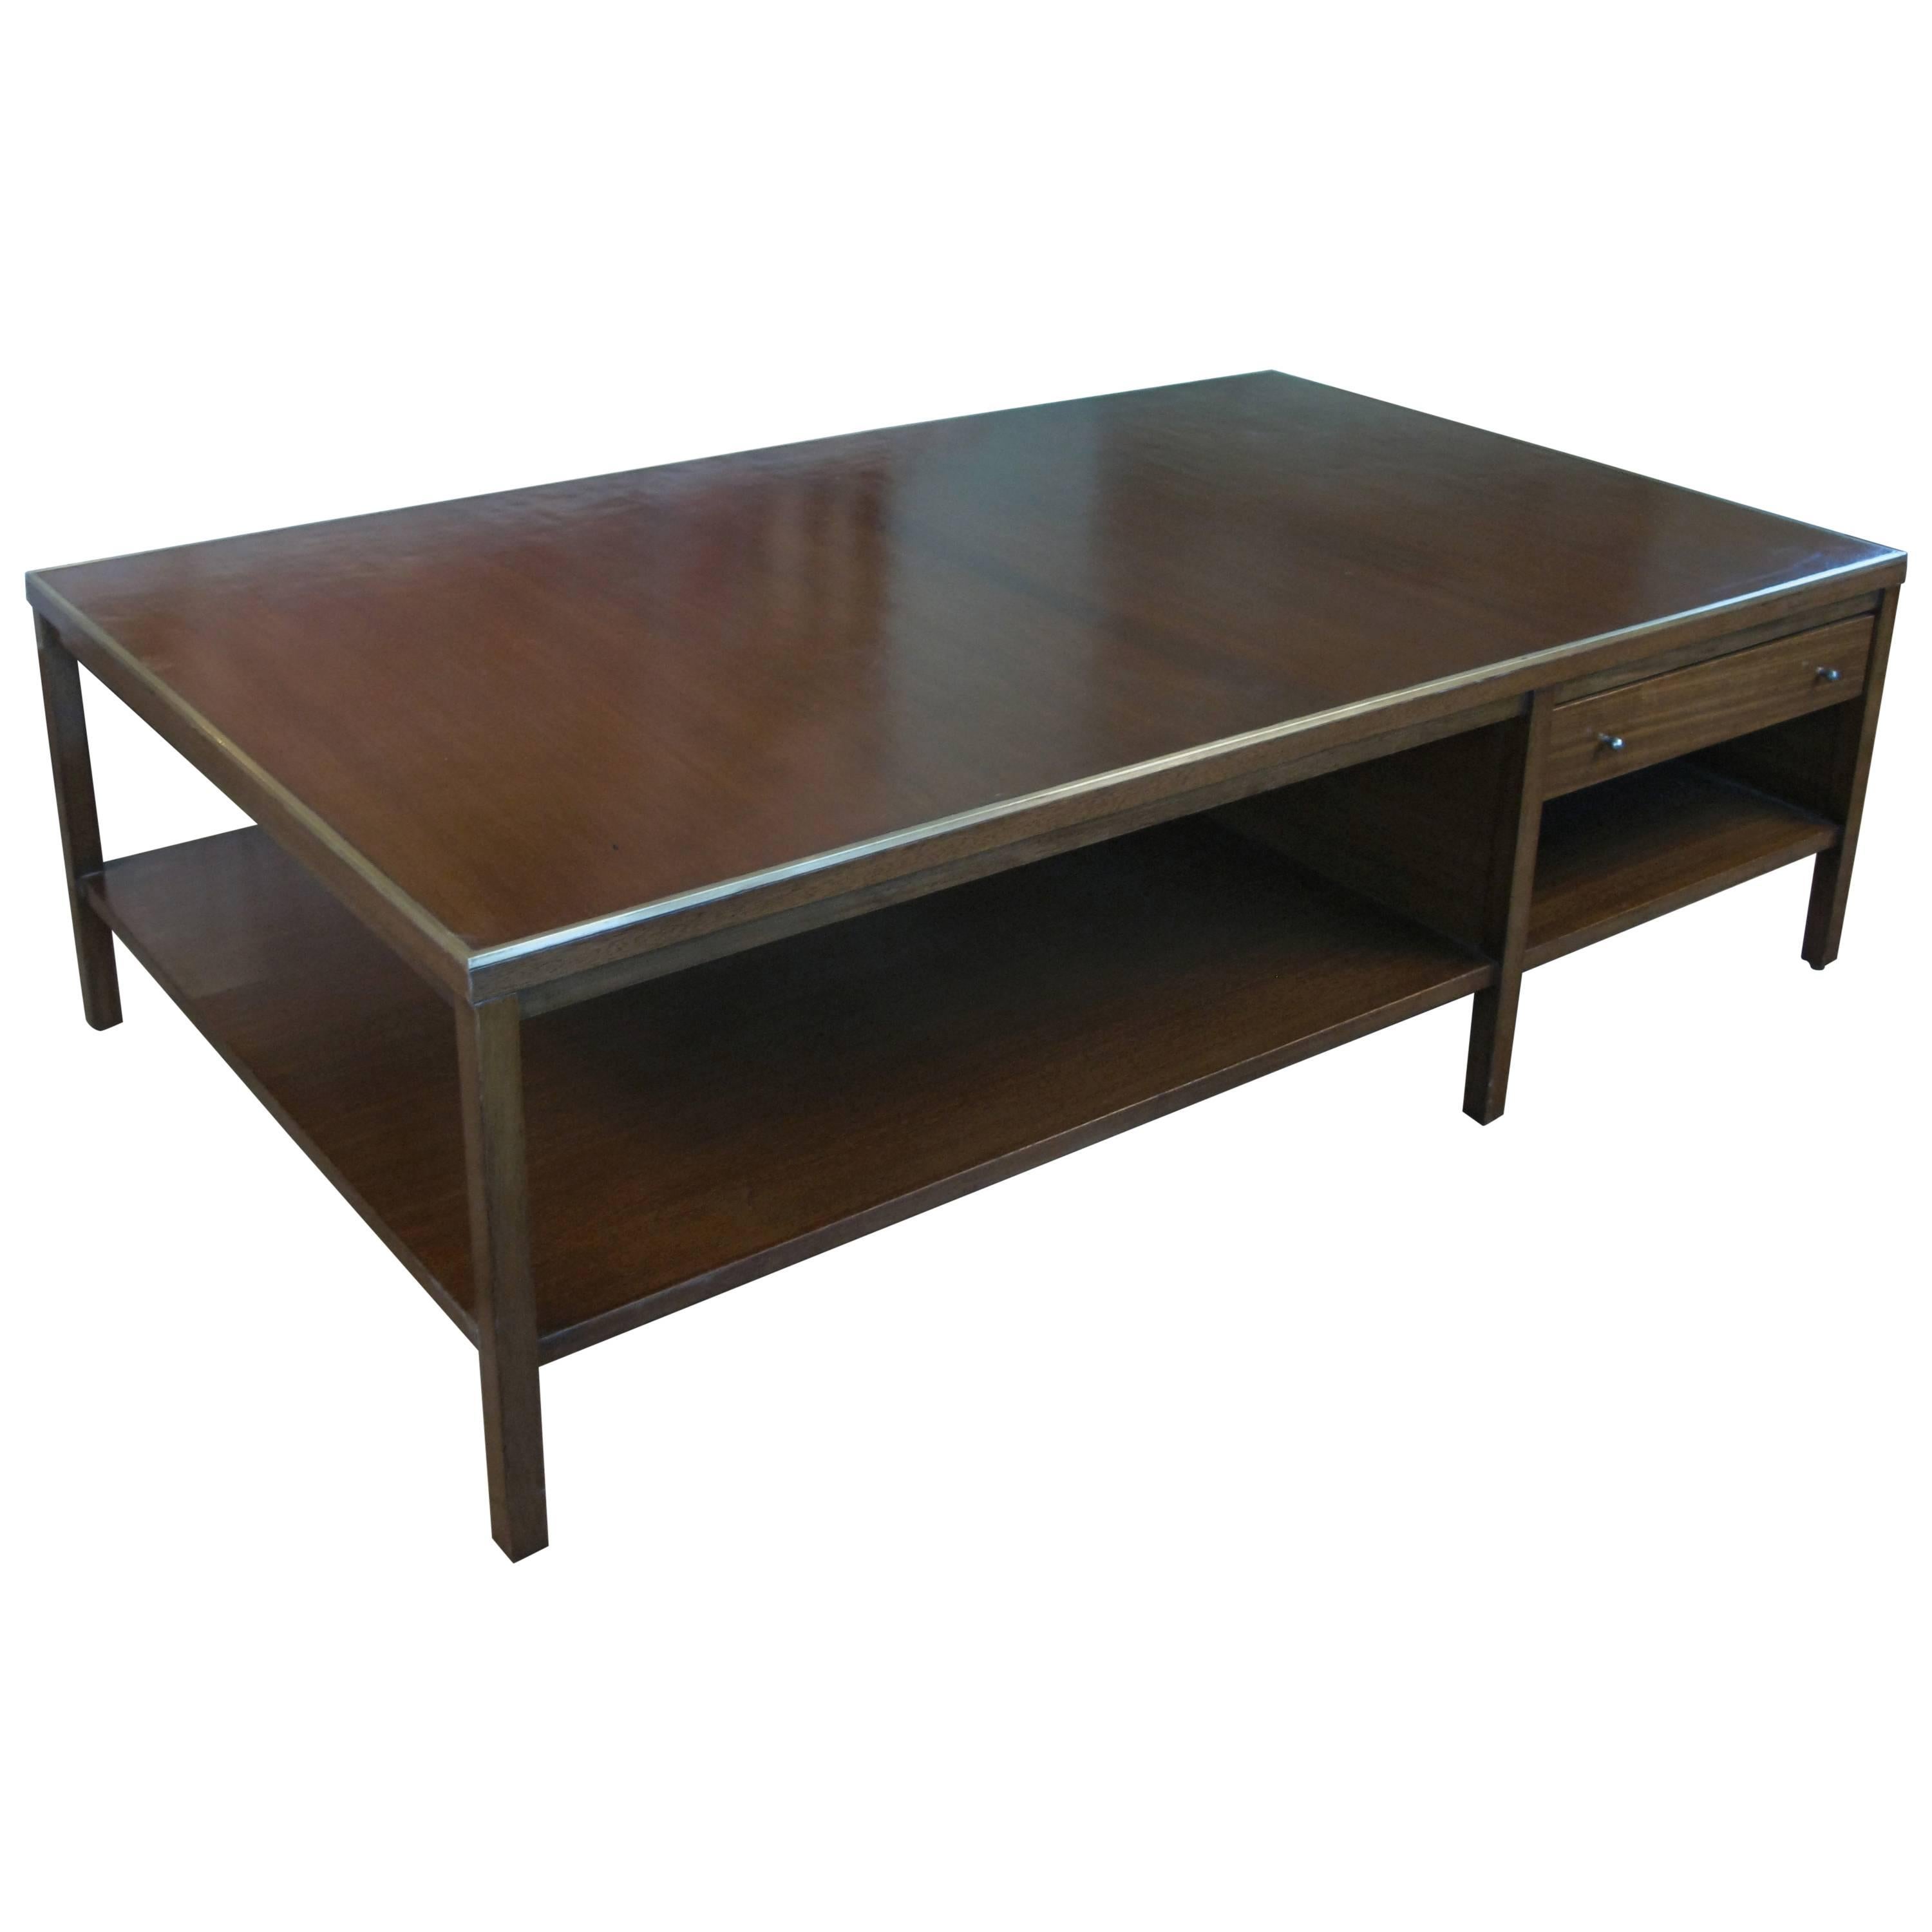 Vintage Leather and Brass Coffee Table by Paul McCobb for Calvin